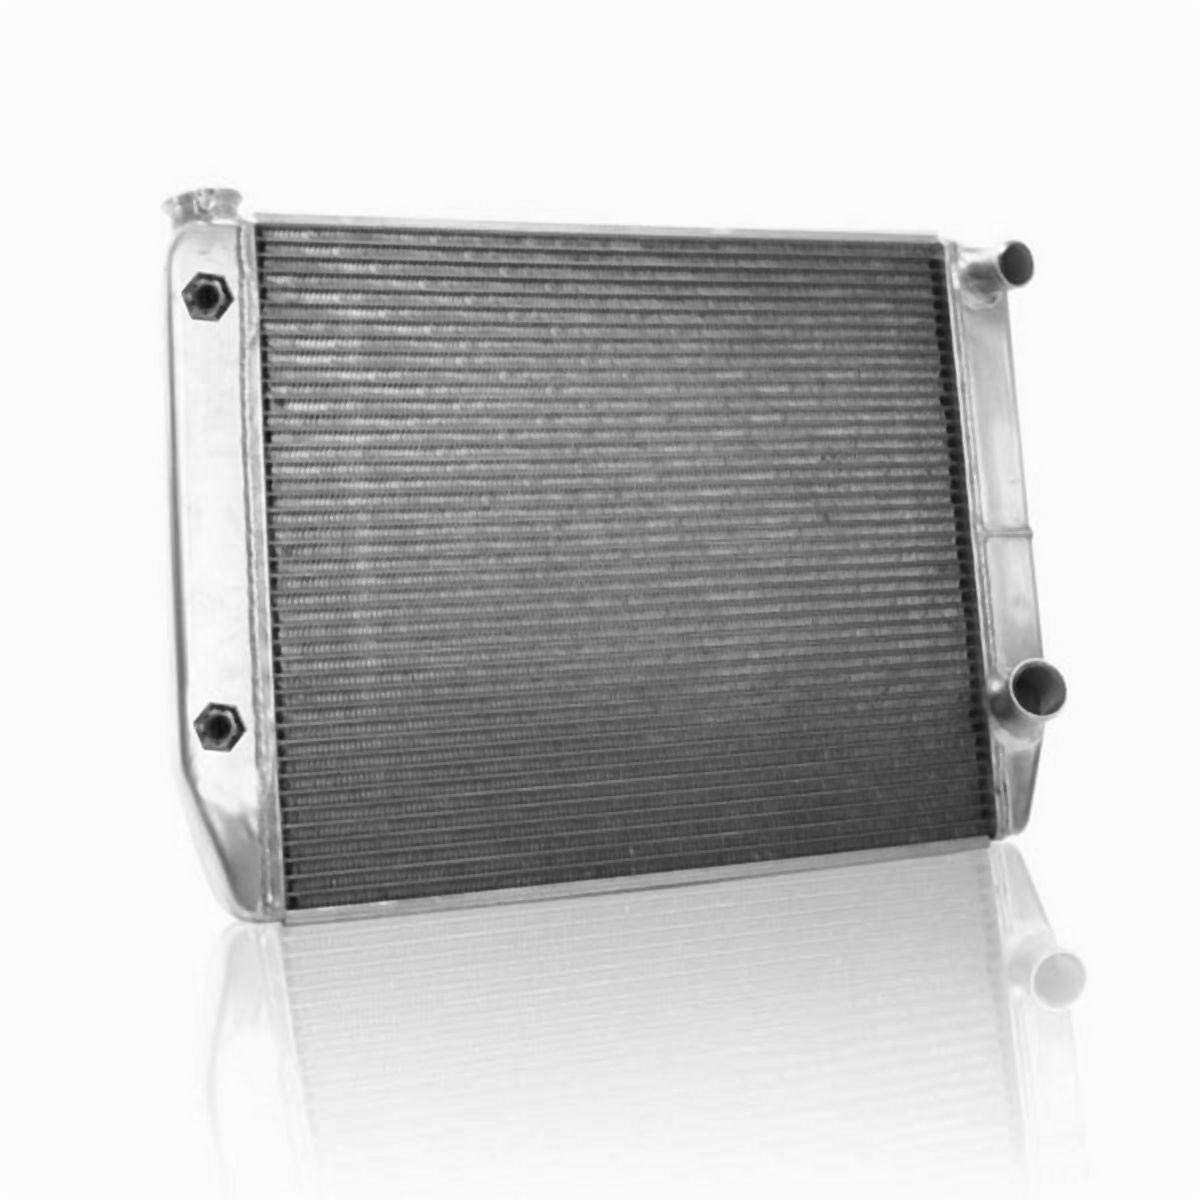 Griffin Radiator  1-26182-XS MaxCool 22 x 19 2-Row Universal Fit Cross Flow Radiator with 1.25 Tube